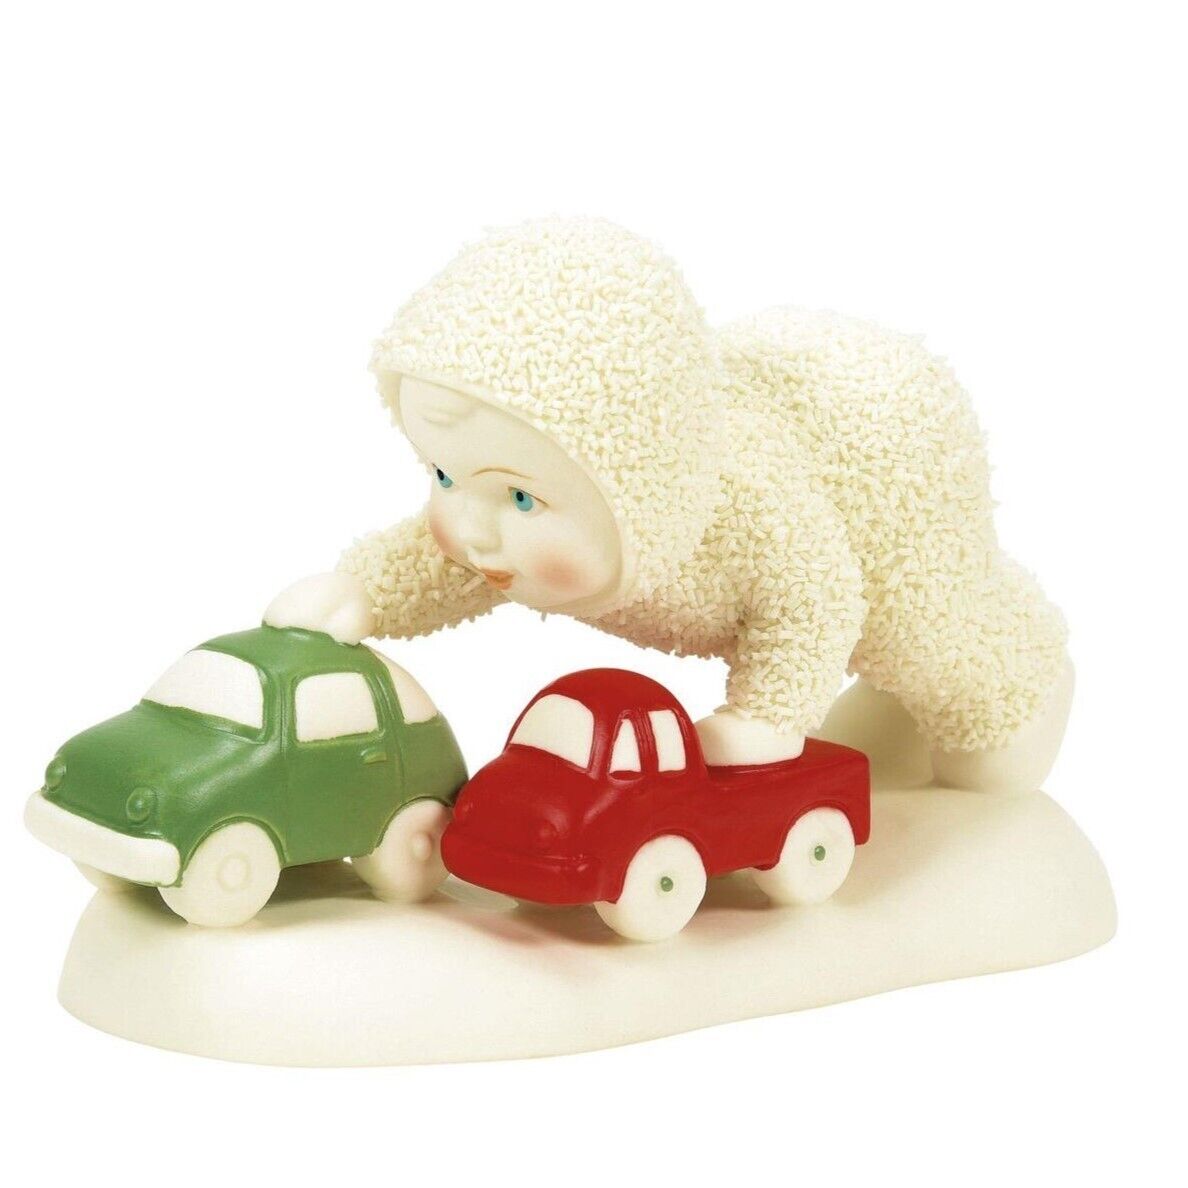 ✿ New DEPT 56 SNOWBABIES The Perfect Christmas Presents TOY CAR PICKUP TRUCK